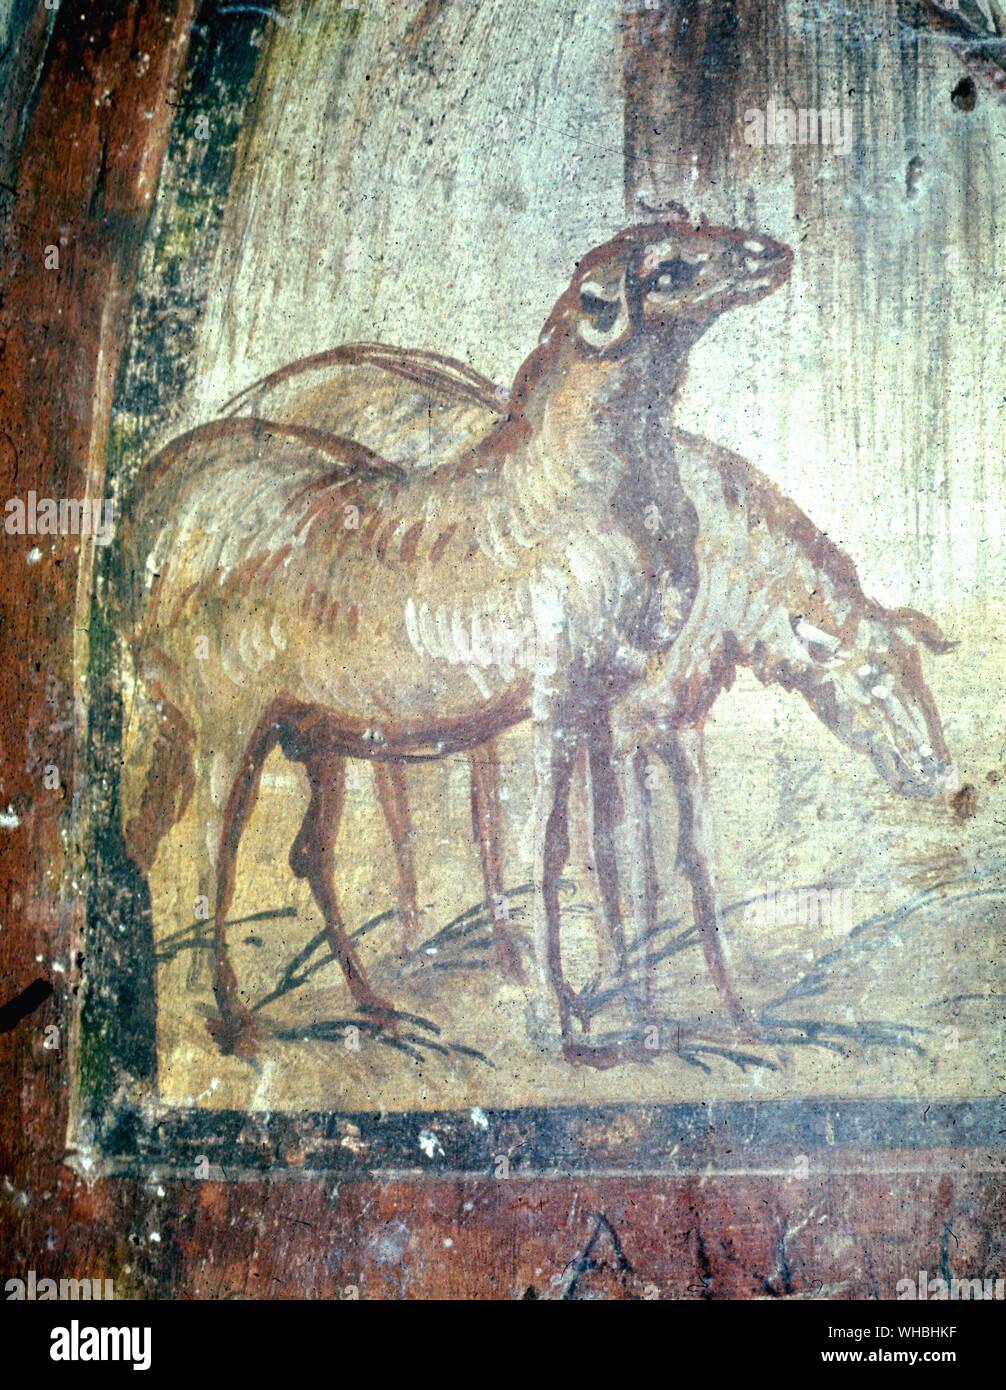 Lambs part of a fresco from the mid 4th Century in the Catacombs of Rome , Italy Stock Photo